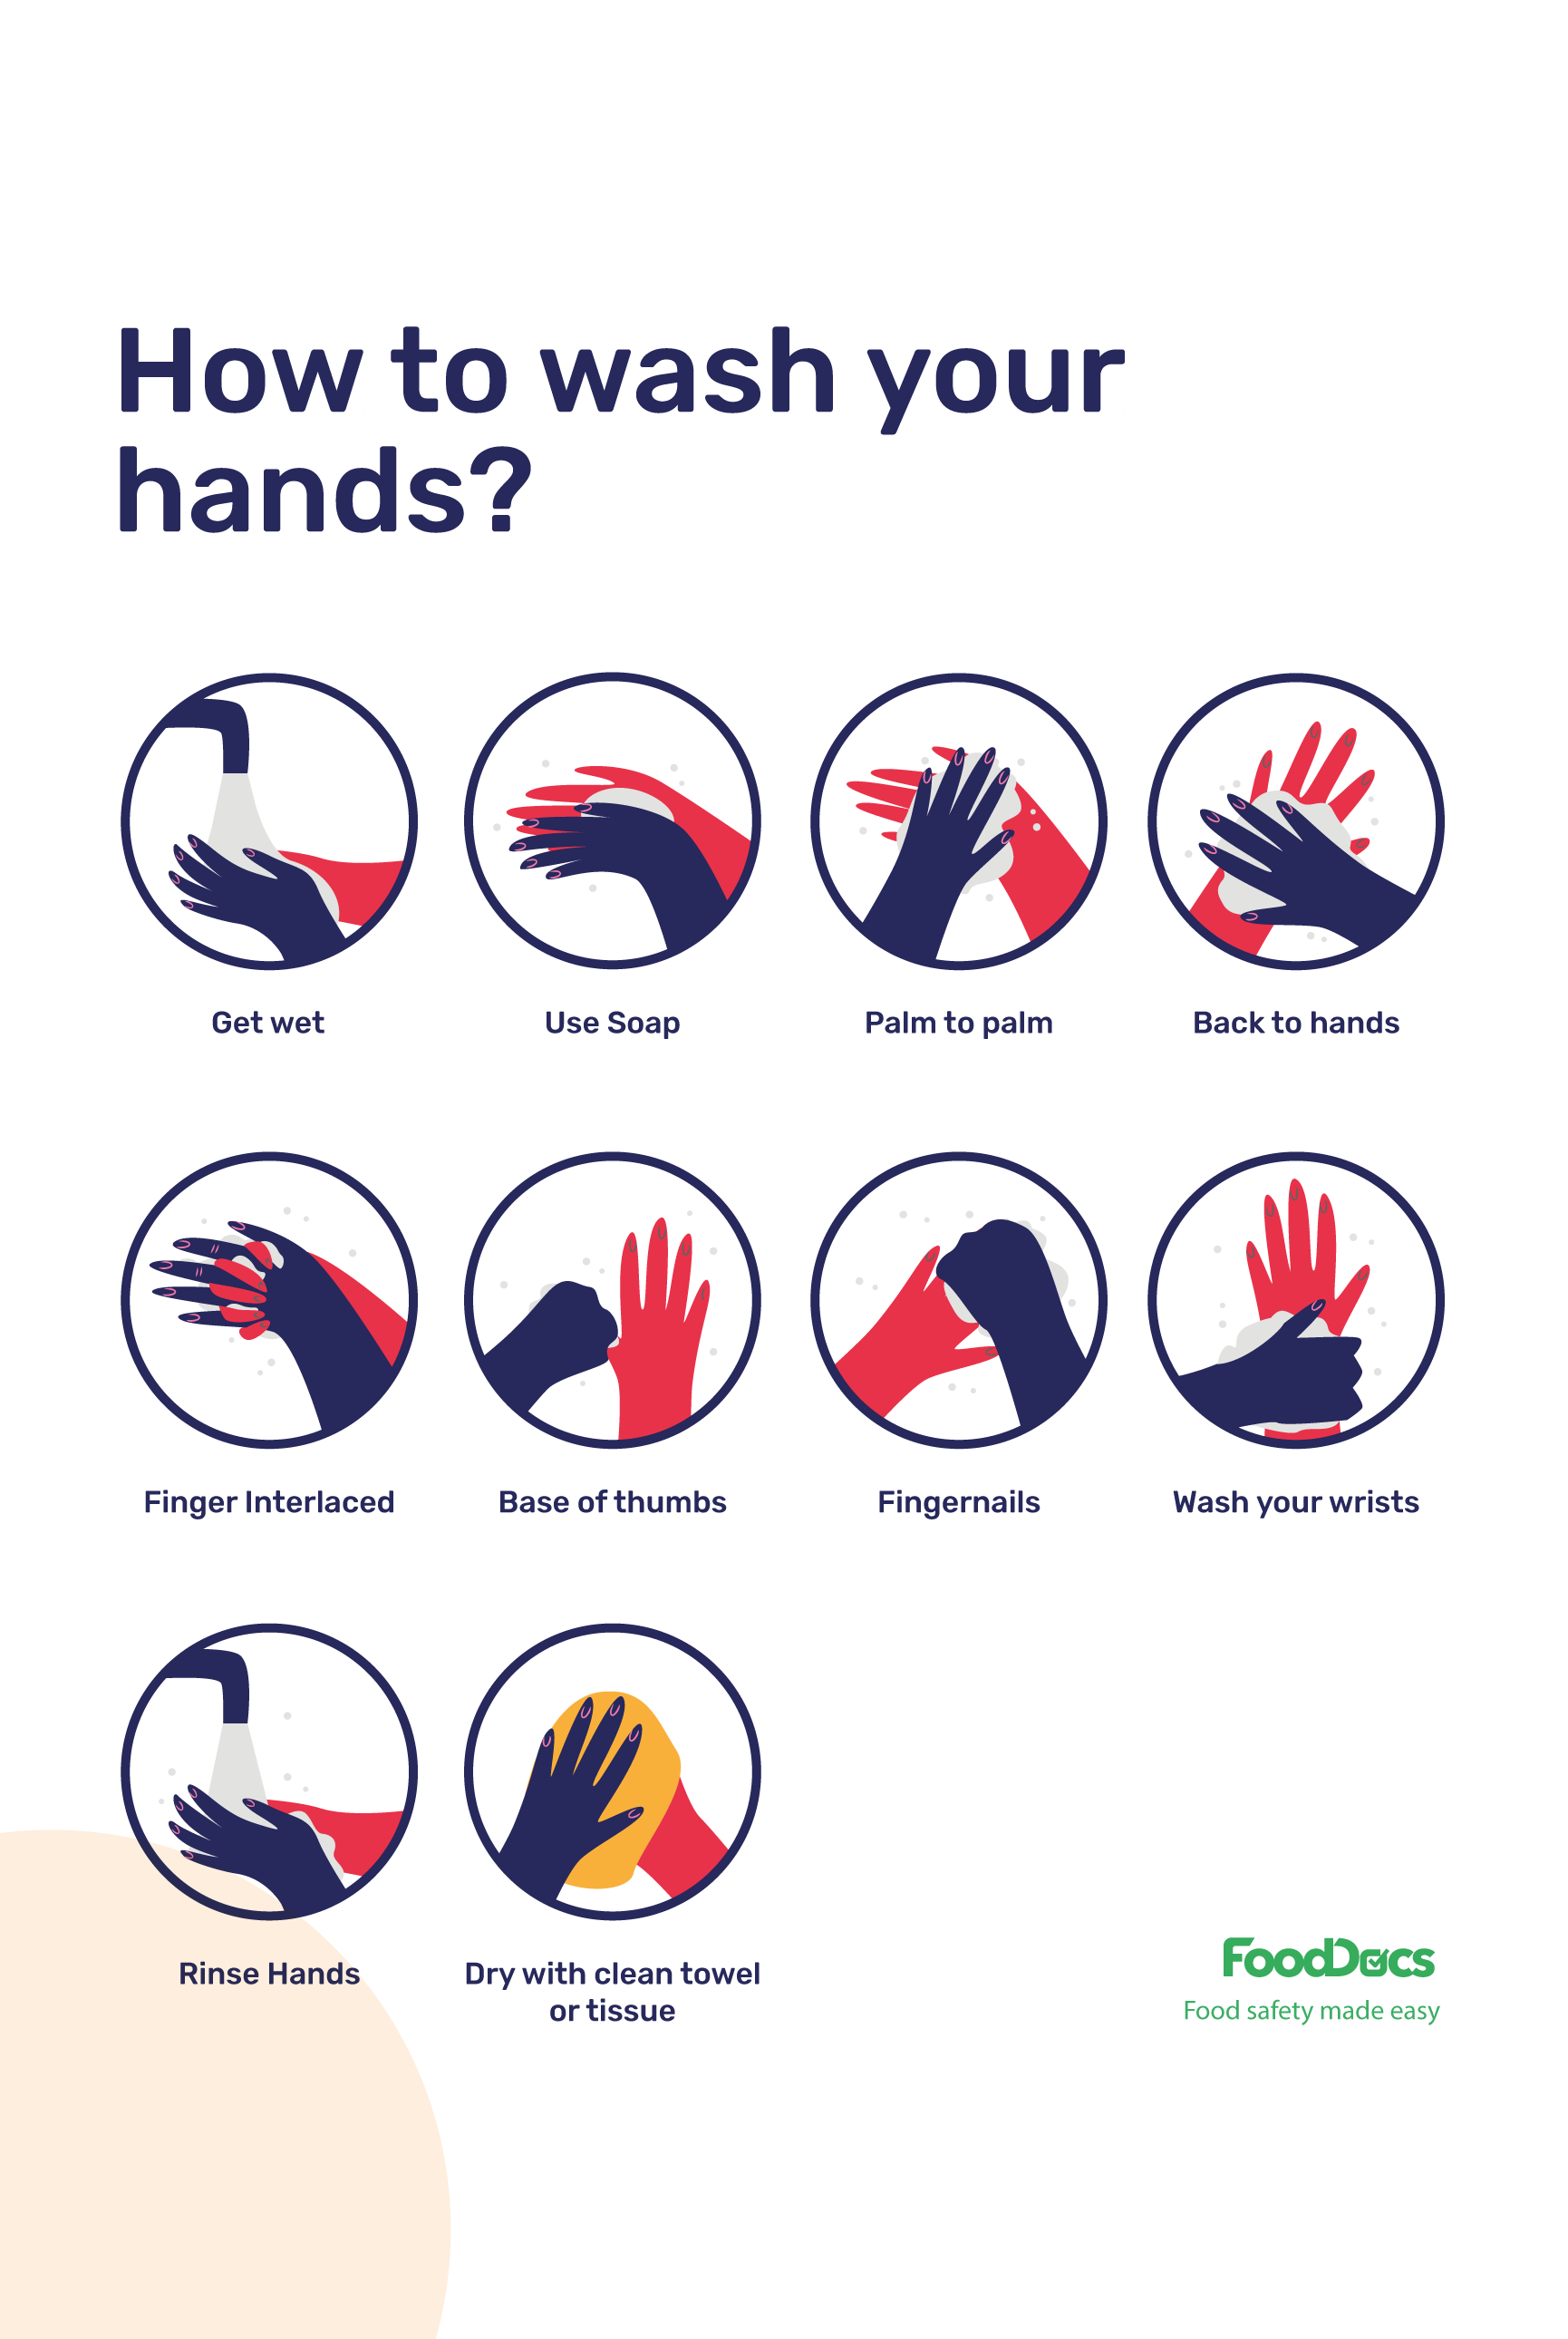 How to Wash Your Hands Properly to Stay Safe and Healthy 